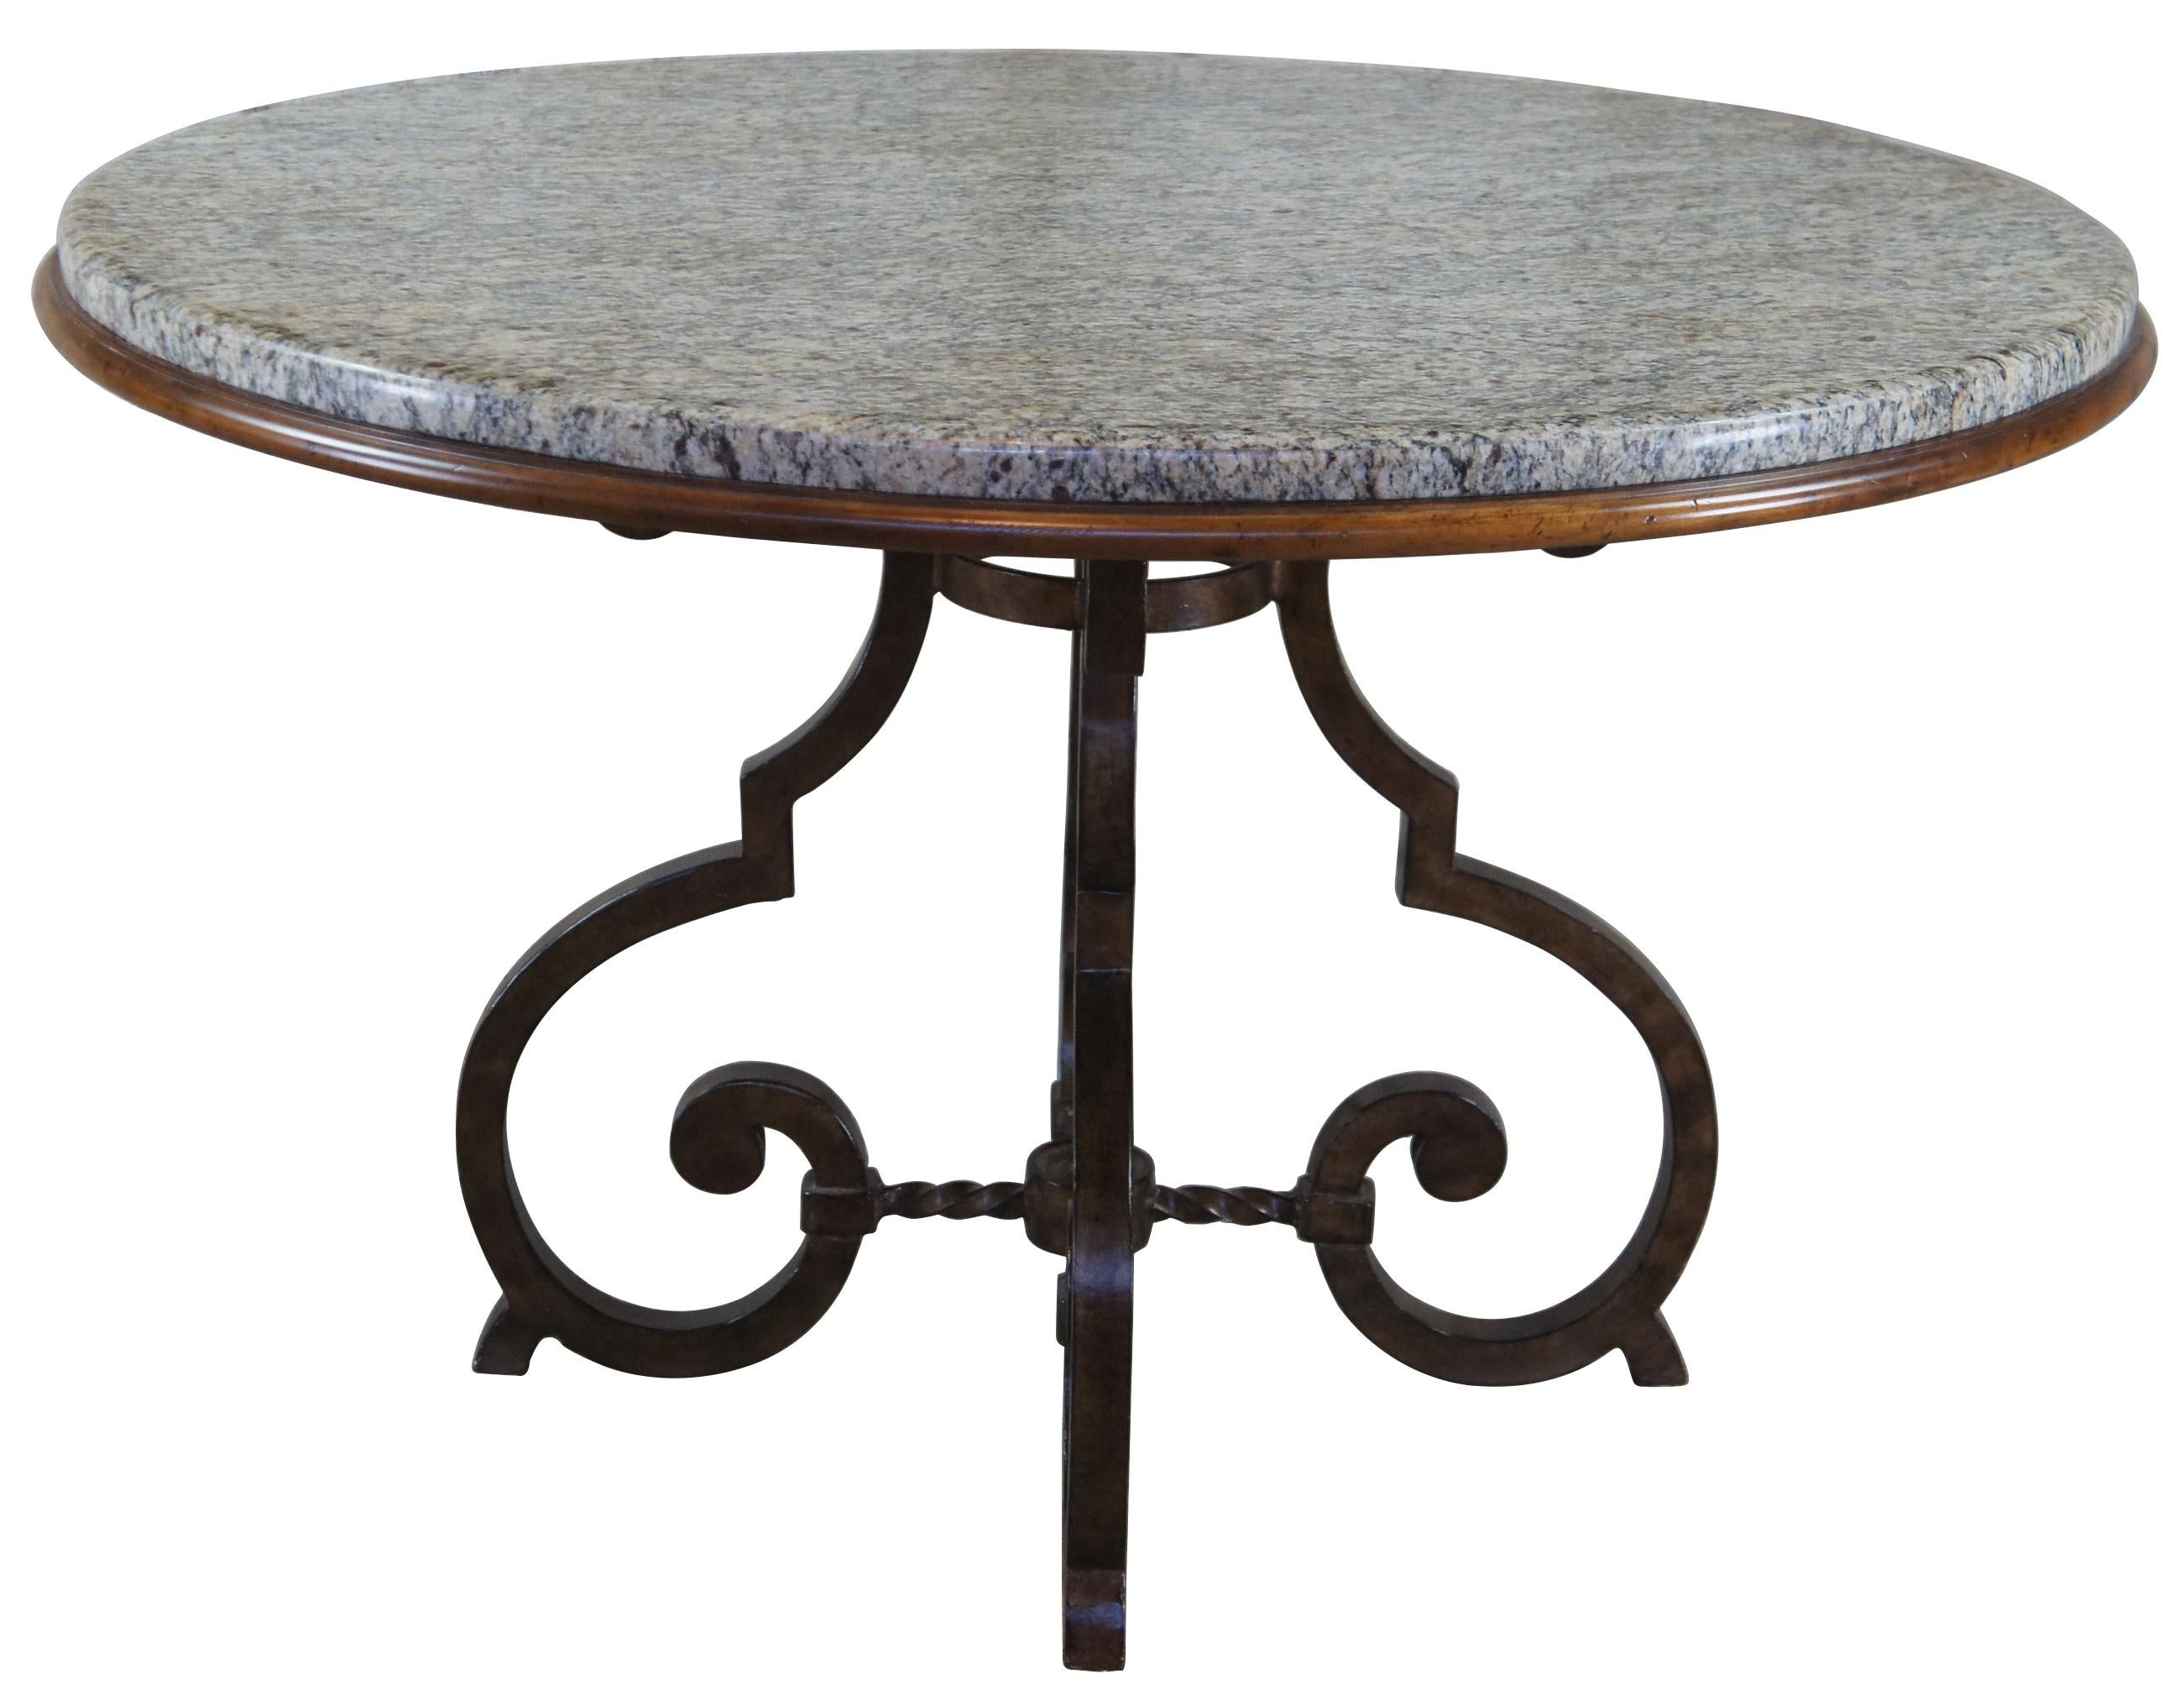 Vintage Drexel Heritage Gourmet dining or breakfast table. Made of granite with scrolled and twisted iron base. 586-620ST-JGG. Measure: 48